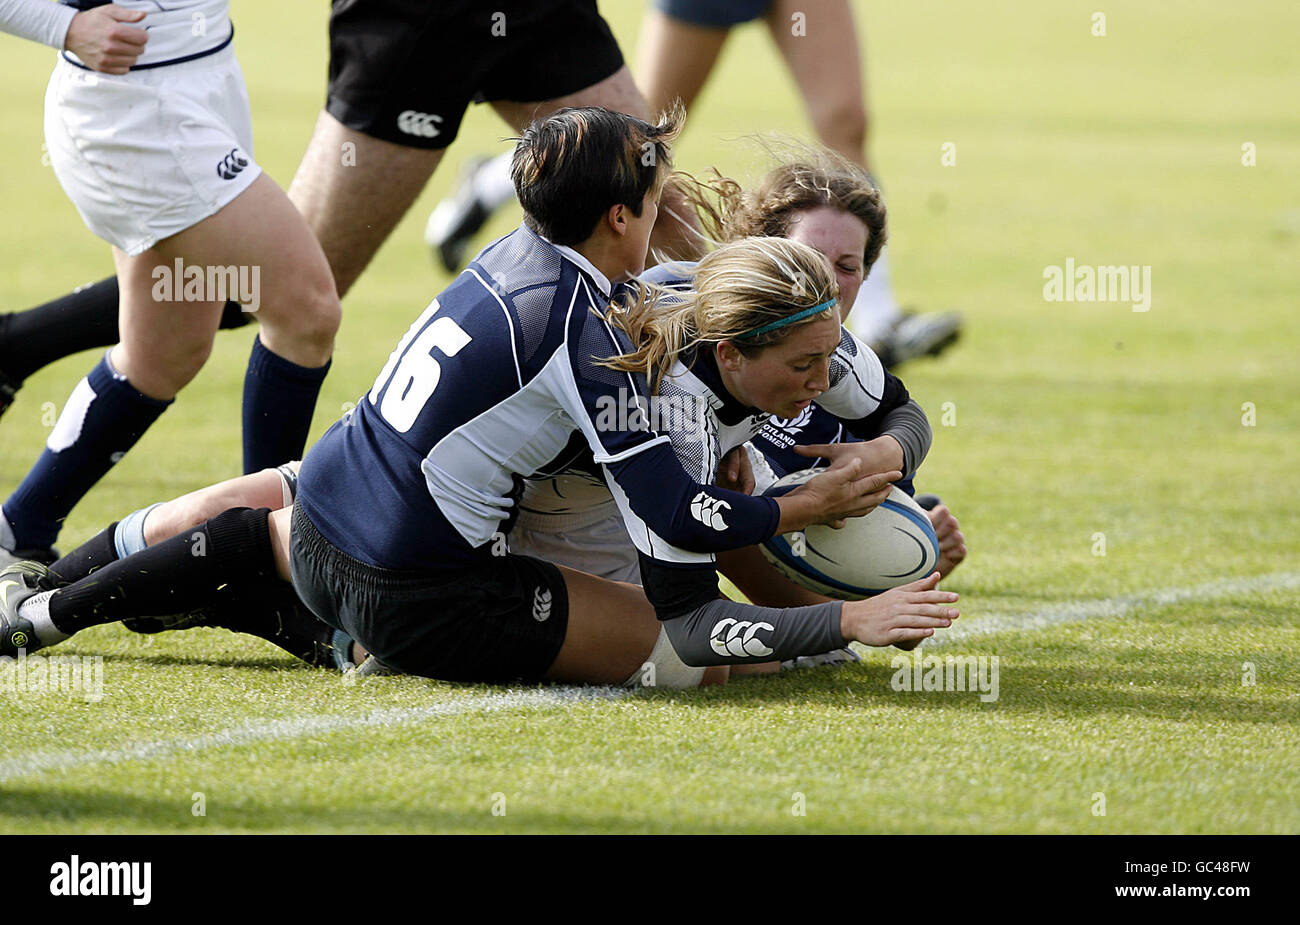 Rugby Union - Scotland Women's National Rugby Team - Training. Scotland Cougars' Annabel Seargent crosses the line to score a try Stock Photo